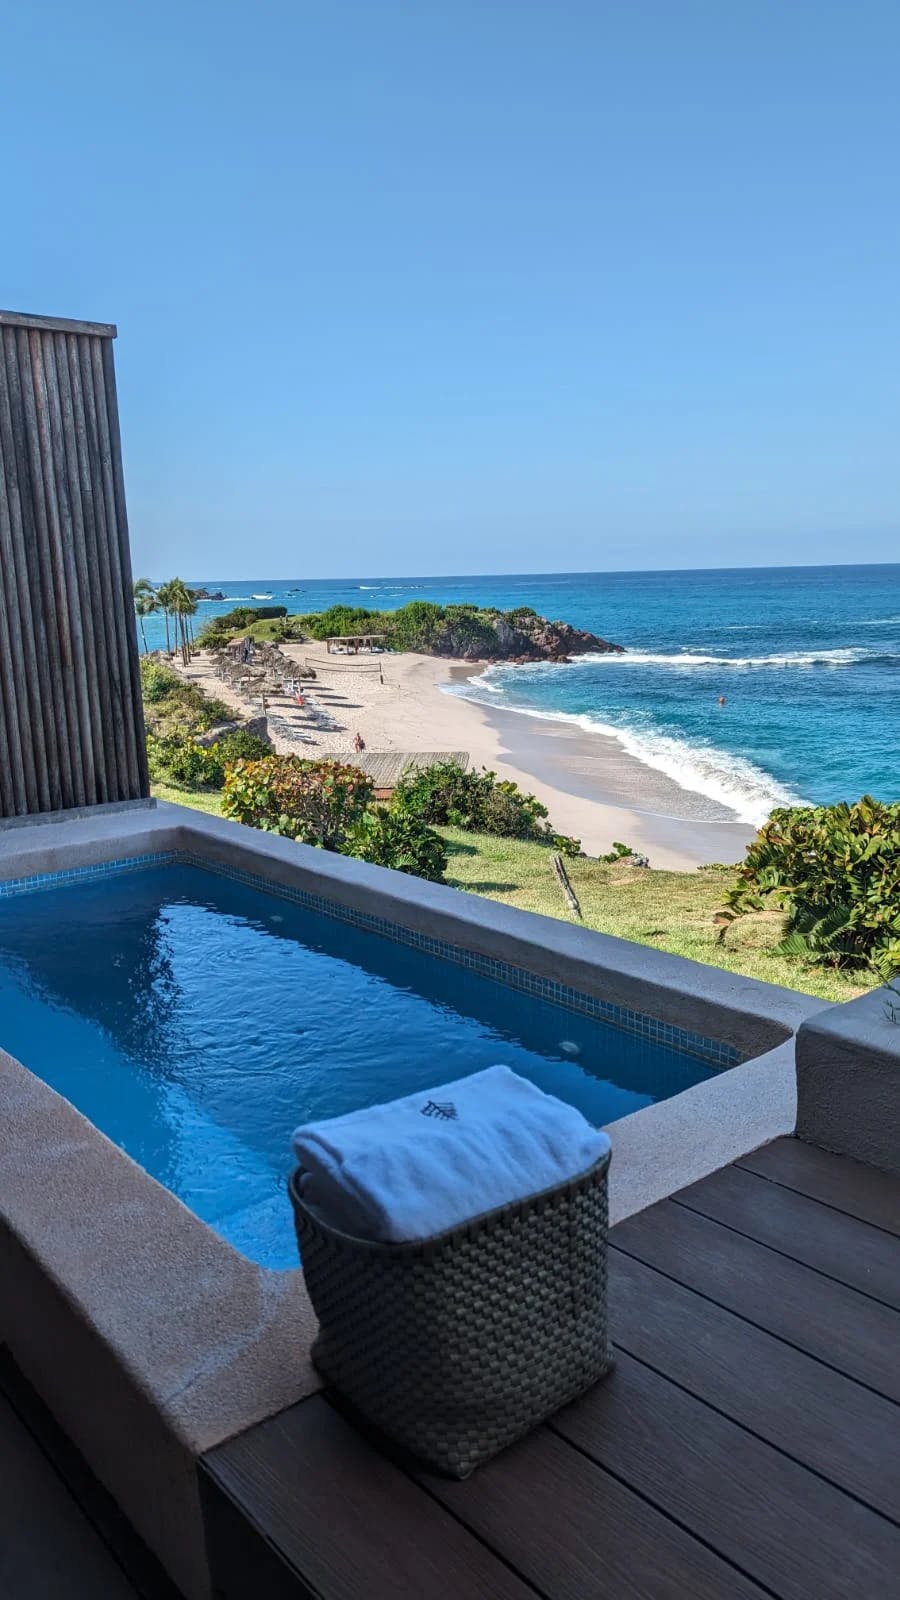 A small pool on a balcony out looking the beach